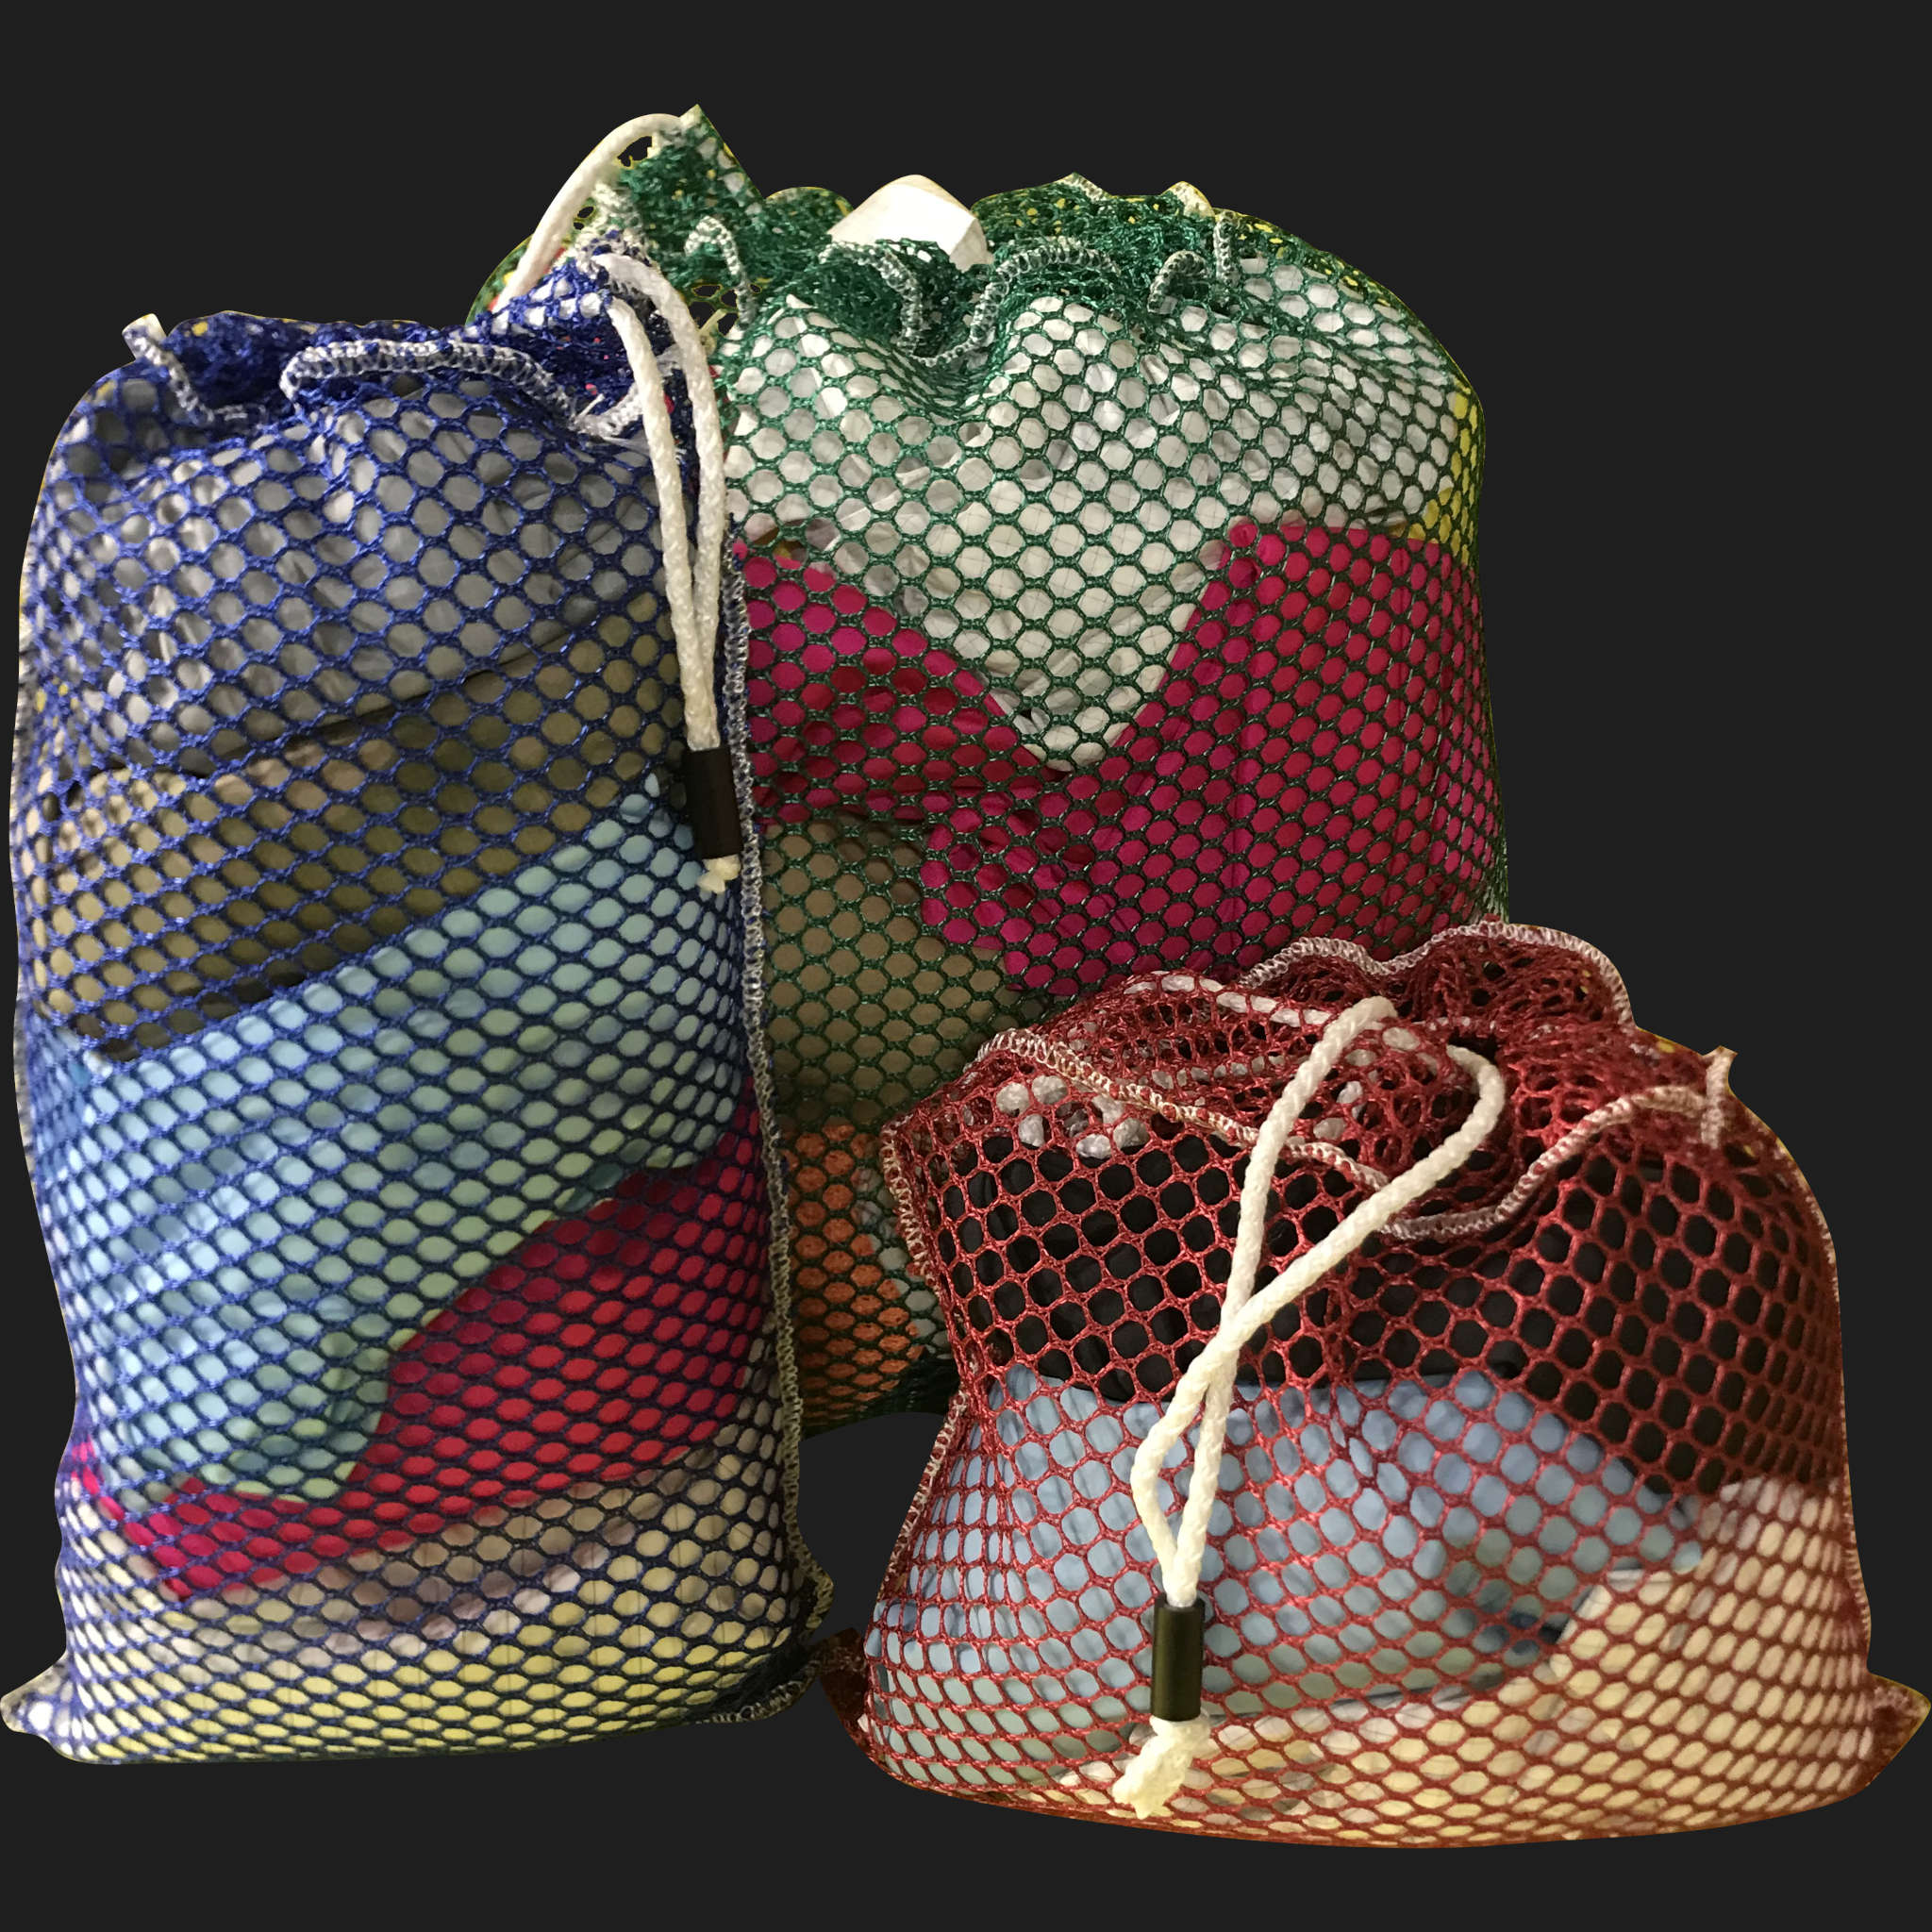 22" x 48" Customized Mesh-Net-Laundry Bags Heavy Duty with Cord and barrellock closure